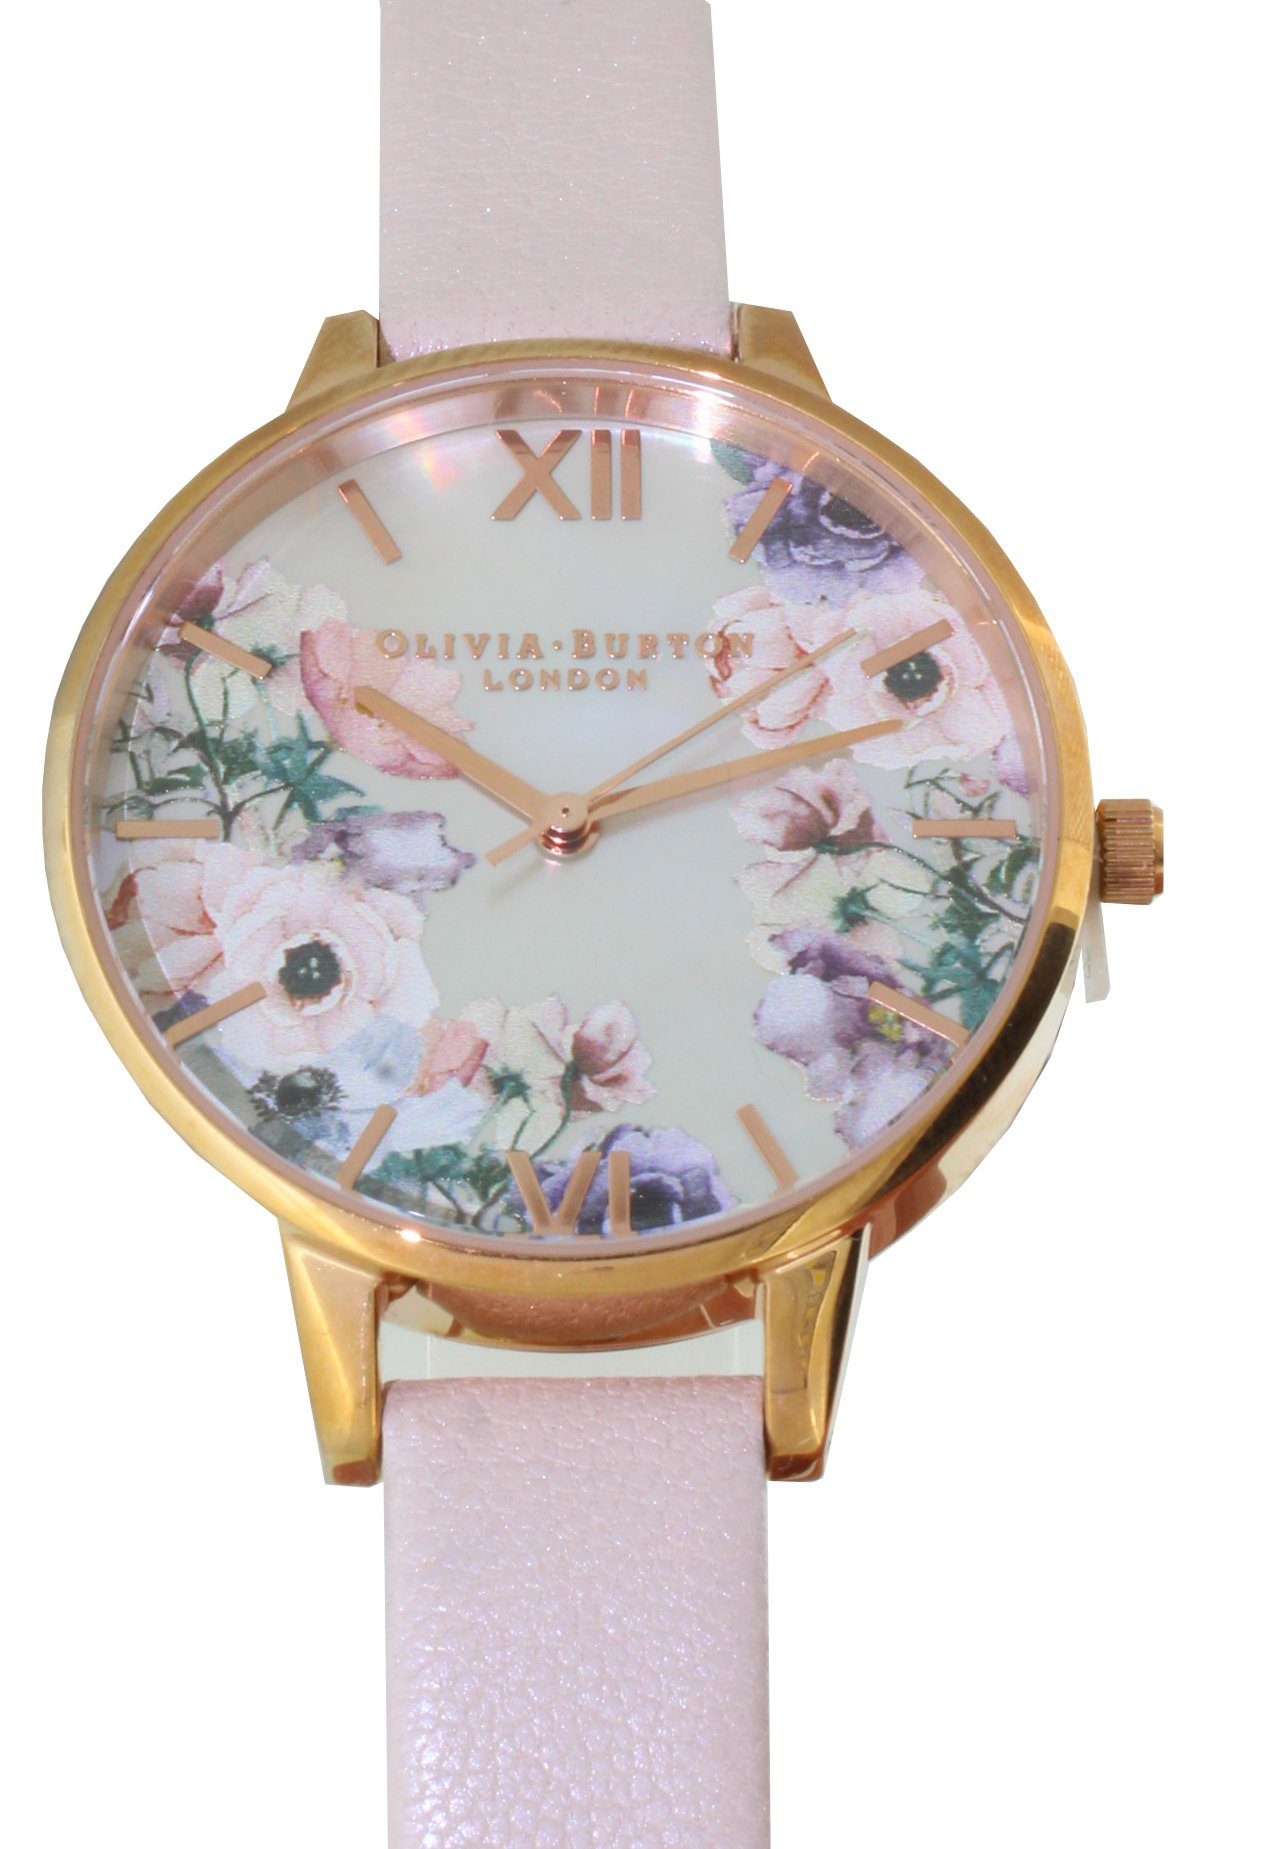 Watercolour OLIVIA OB16PP53 Demi Quarzuhr Nude Mother-Of-Pearl BURTON Florals Watch With Dial